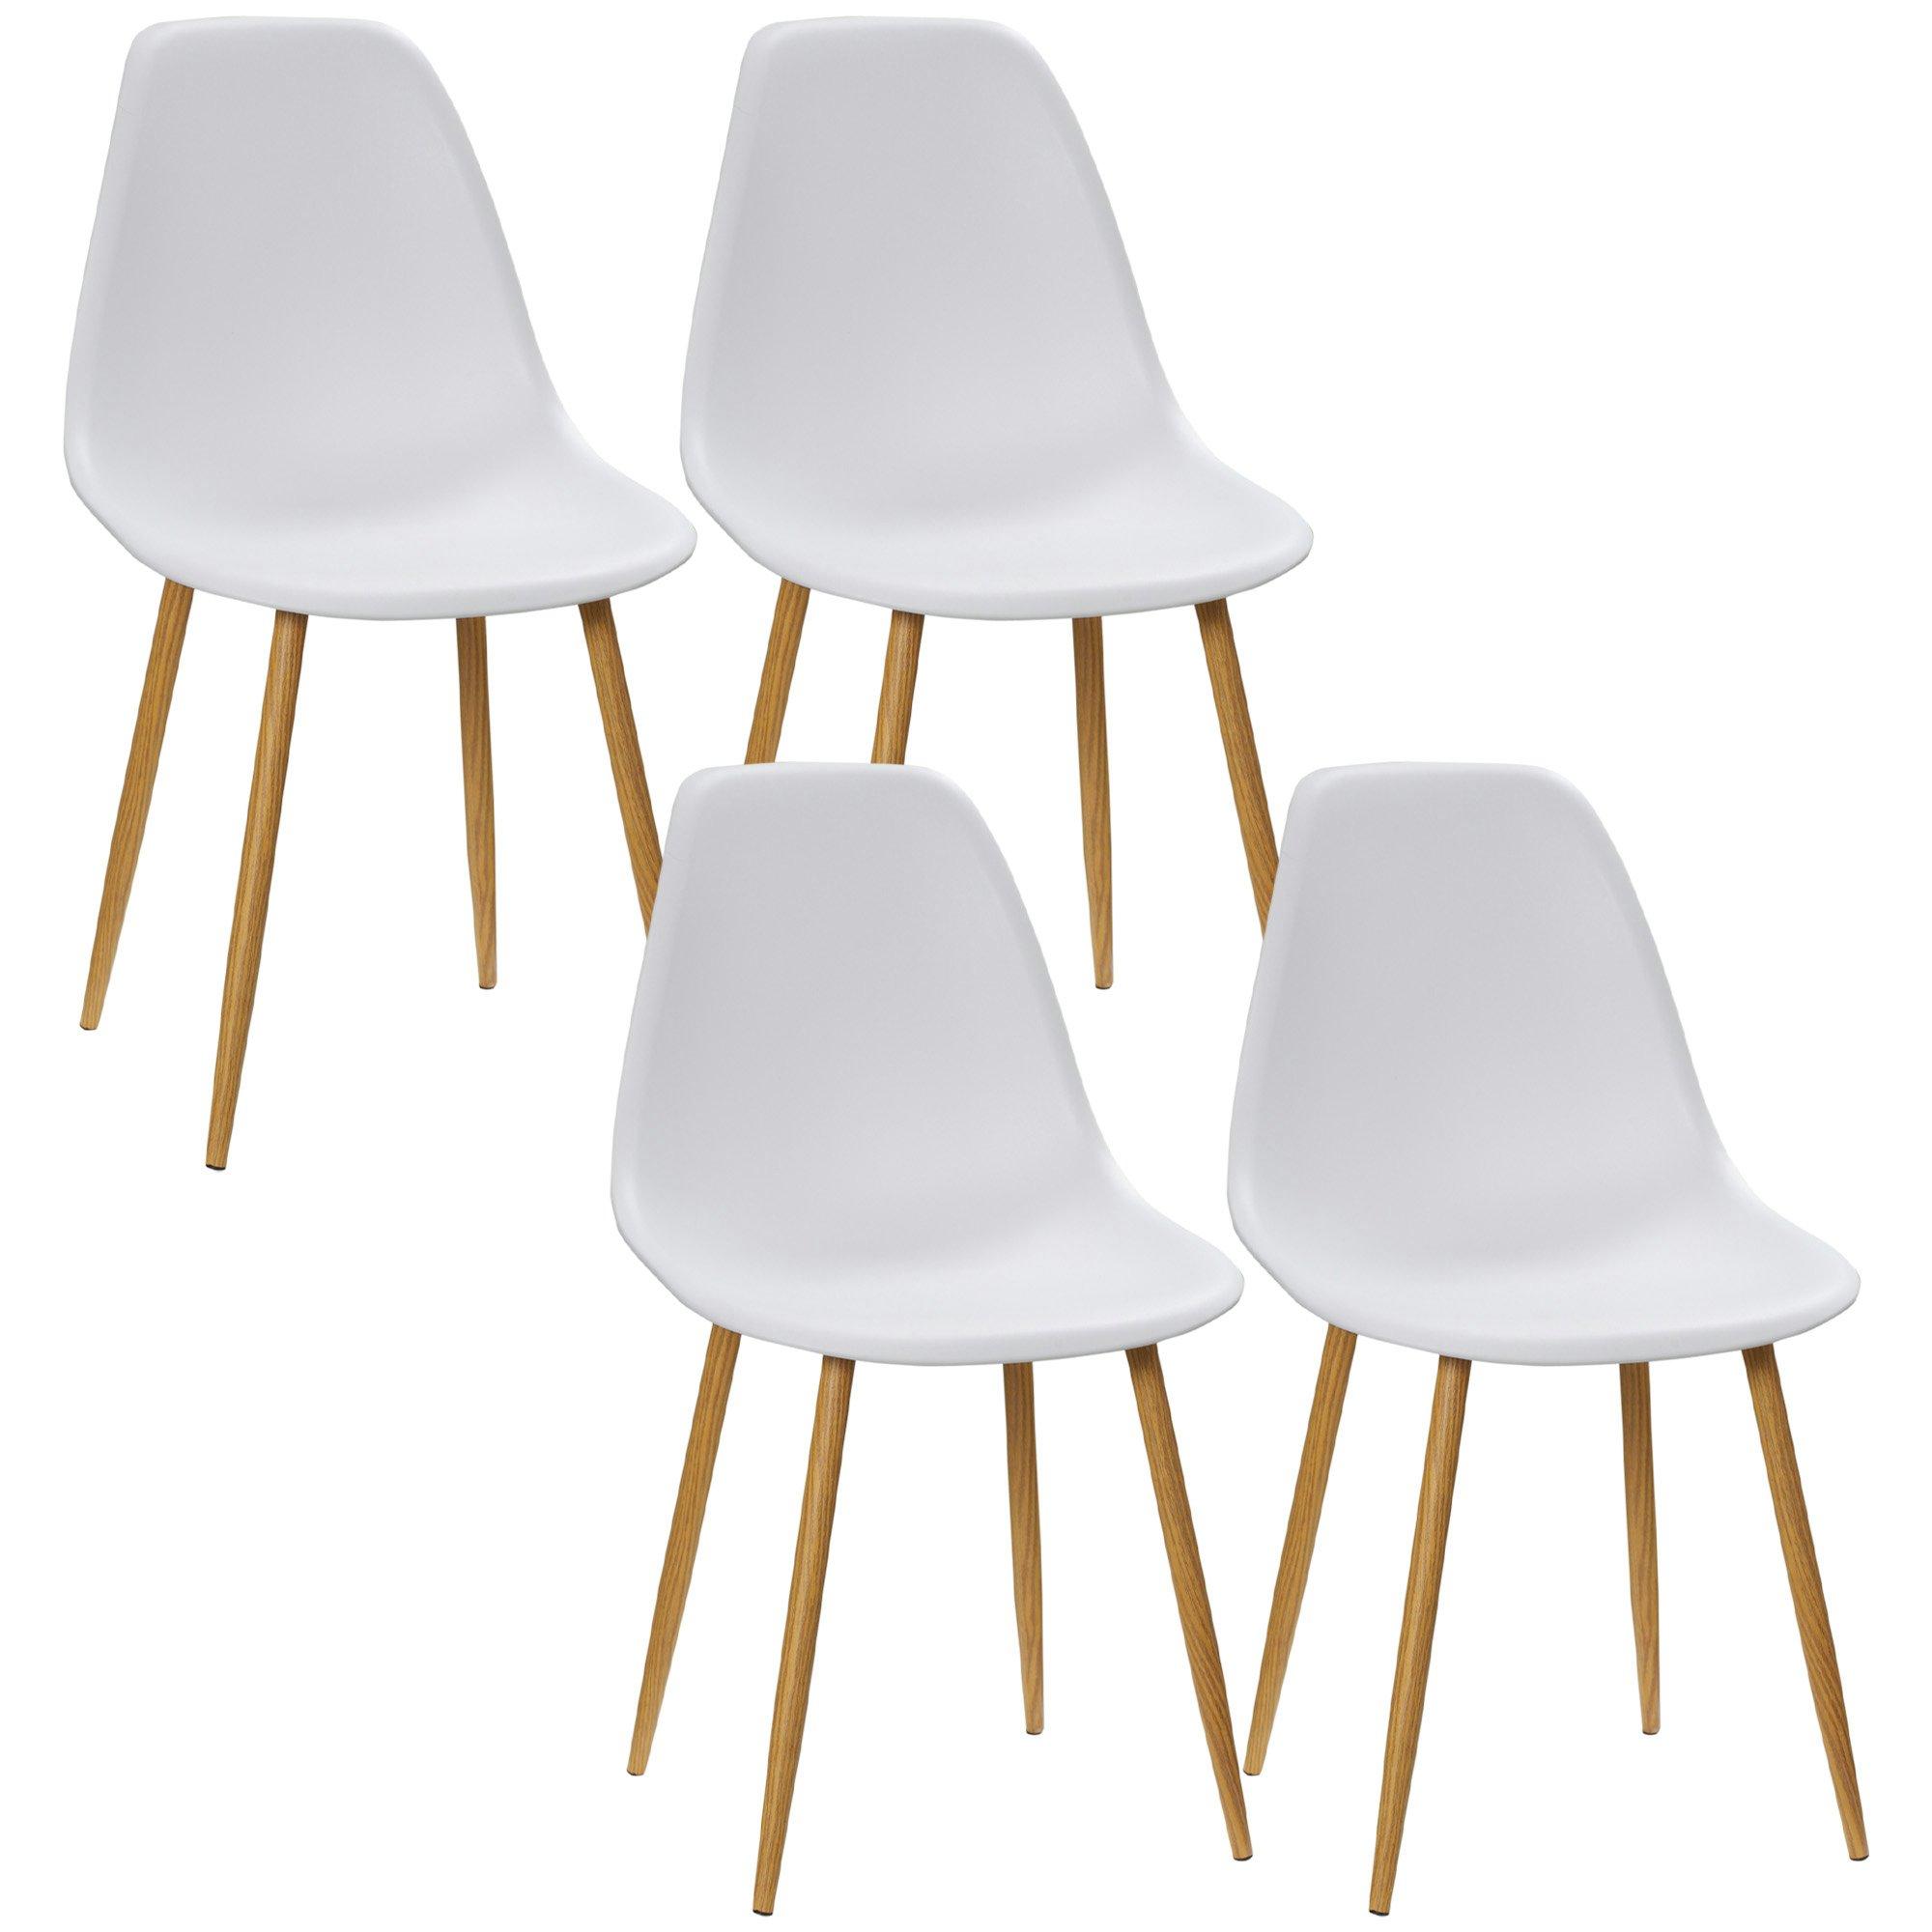 Dining Chairs Set of 4 Modern Armless Accent Chair Back for Kitchen